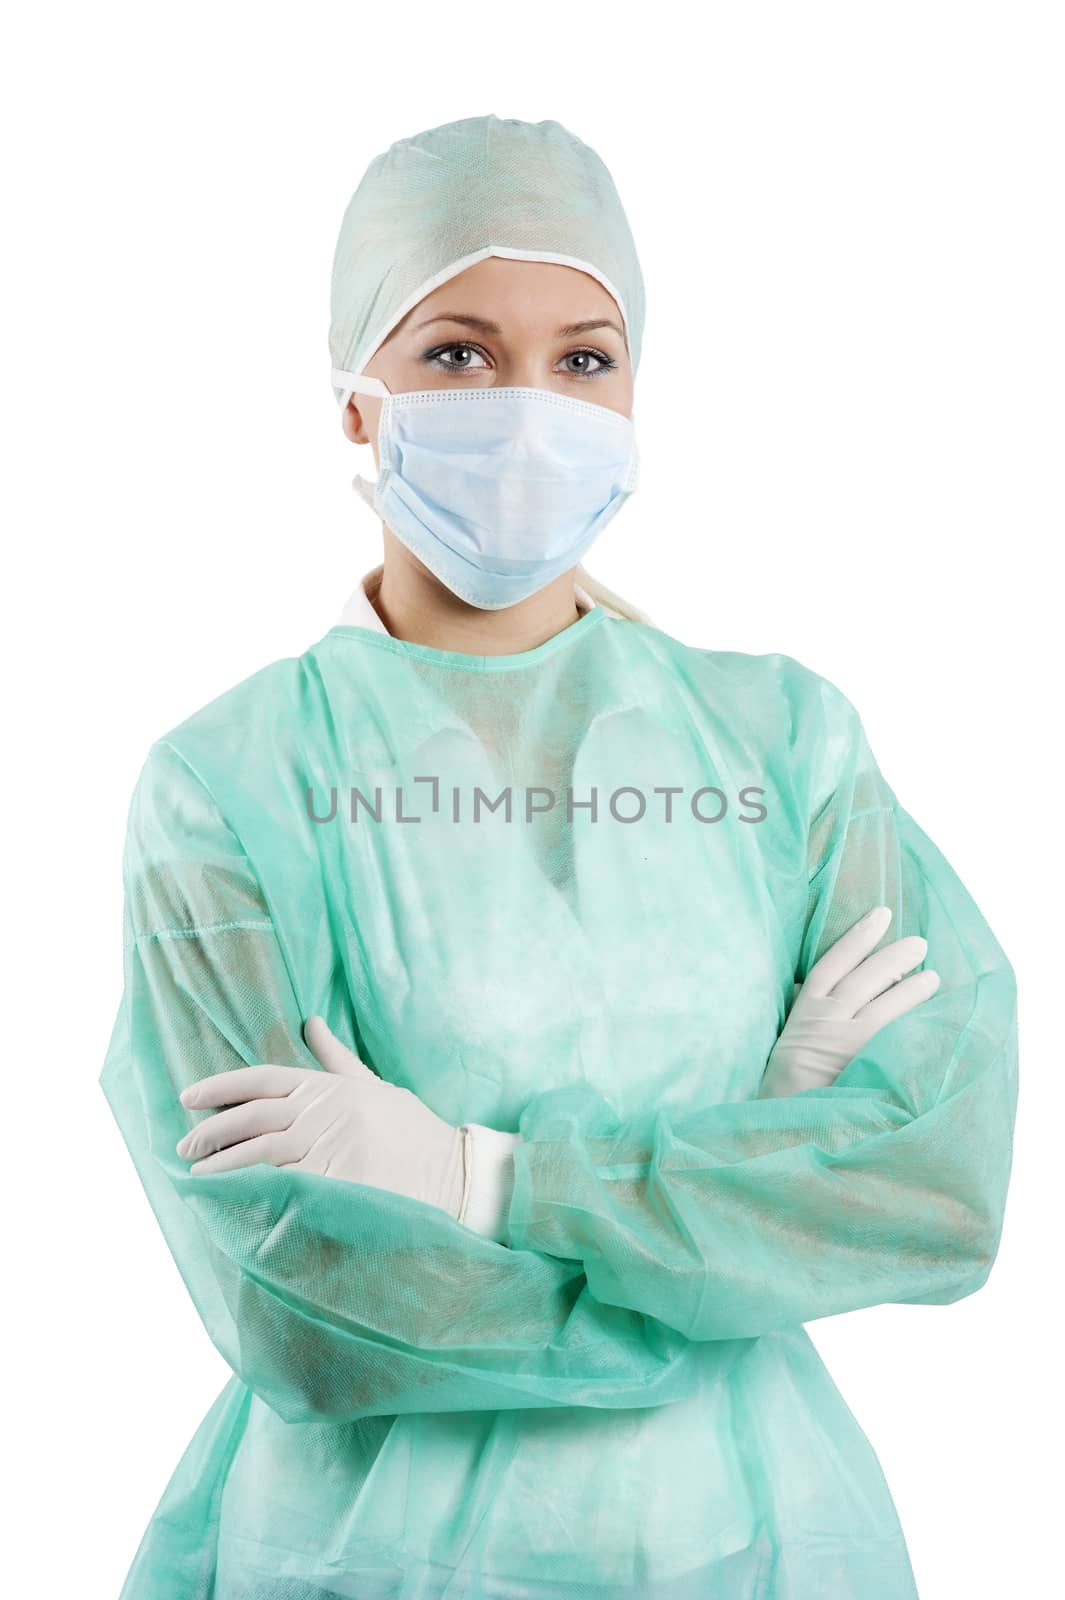 young beauty nurse in green operation dress with surgery cap and mask posing